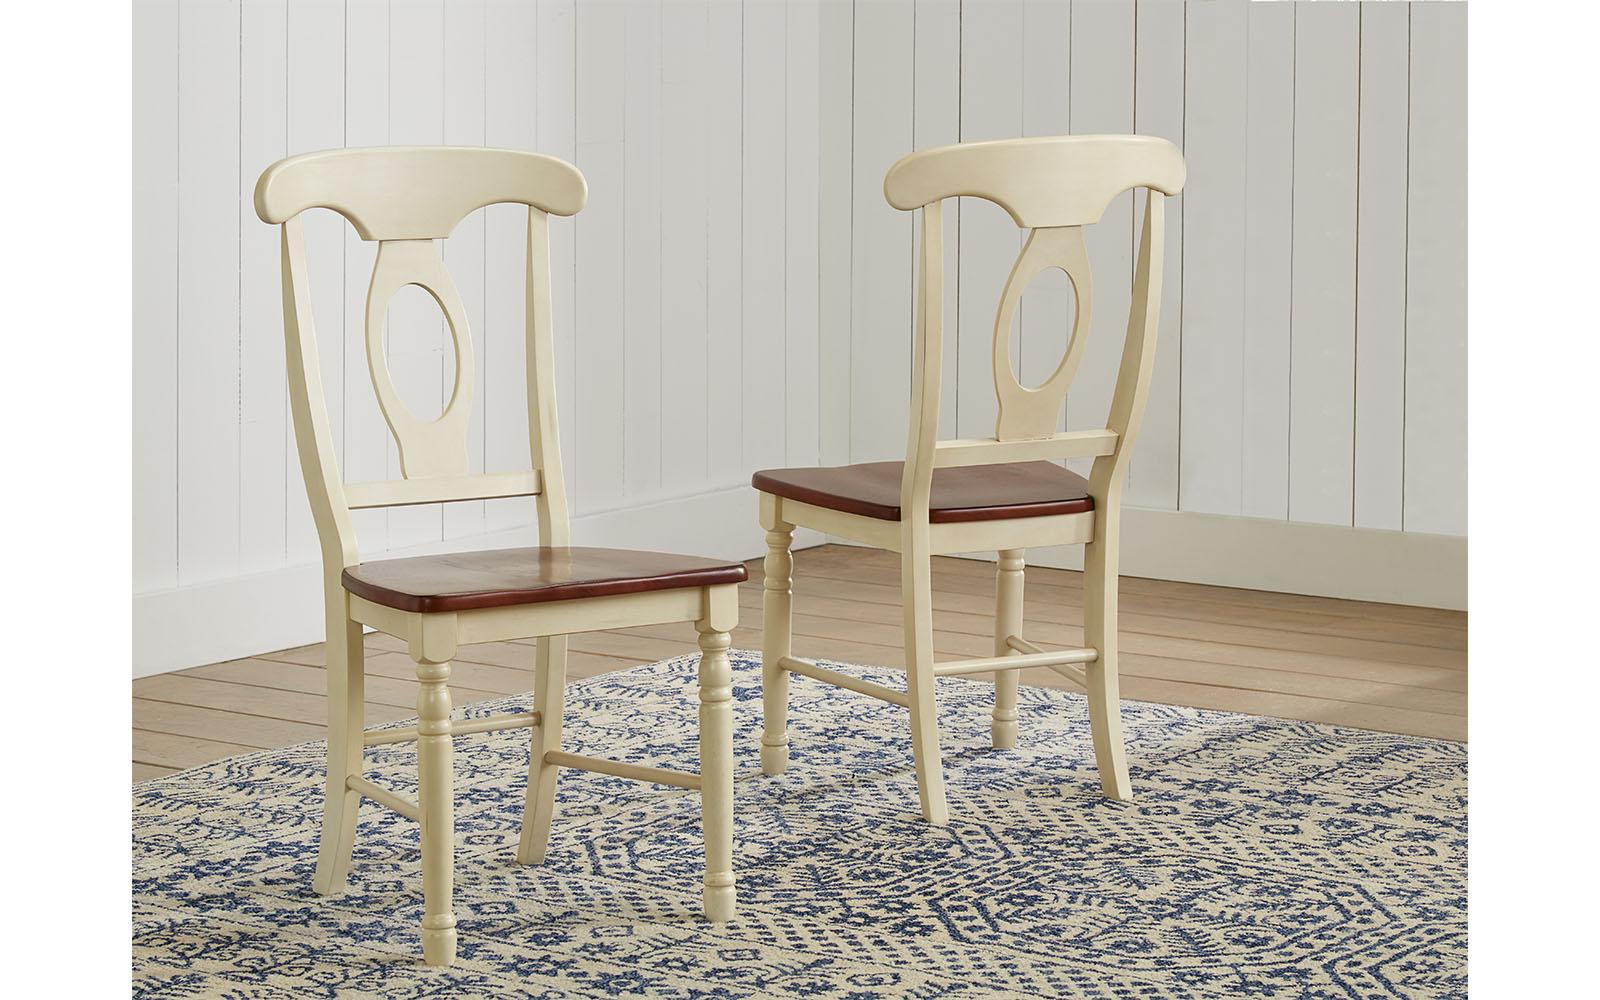 Rustic Dining Side Chair British Isles MB BRIMB285K-Set-2 in Brown, White 